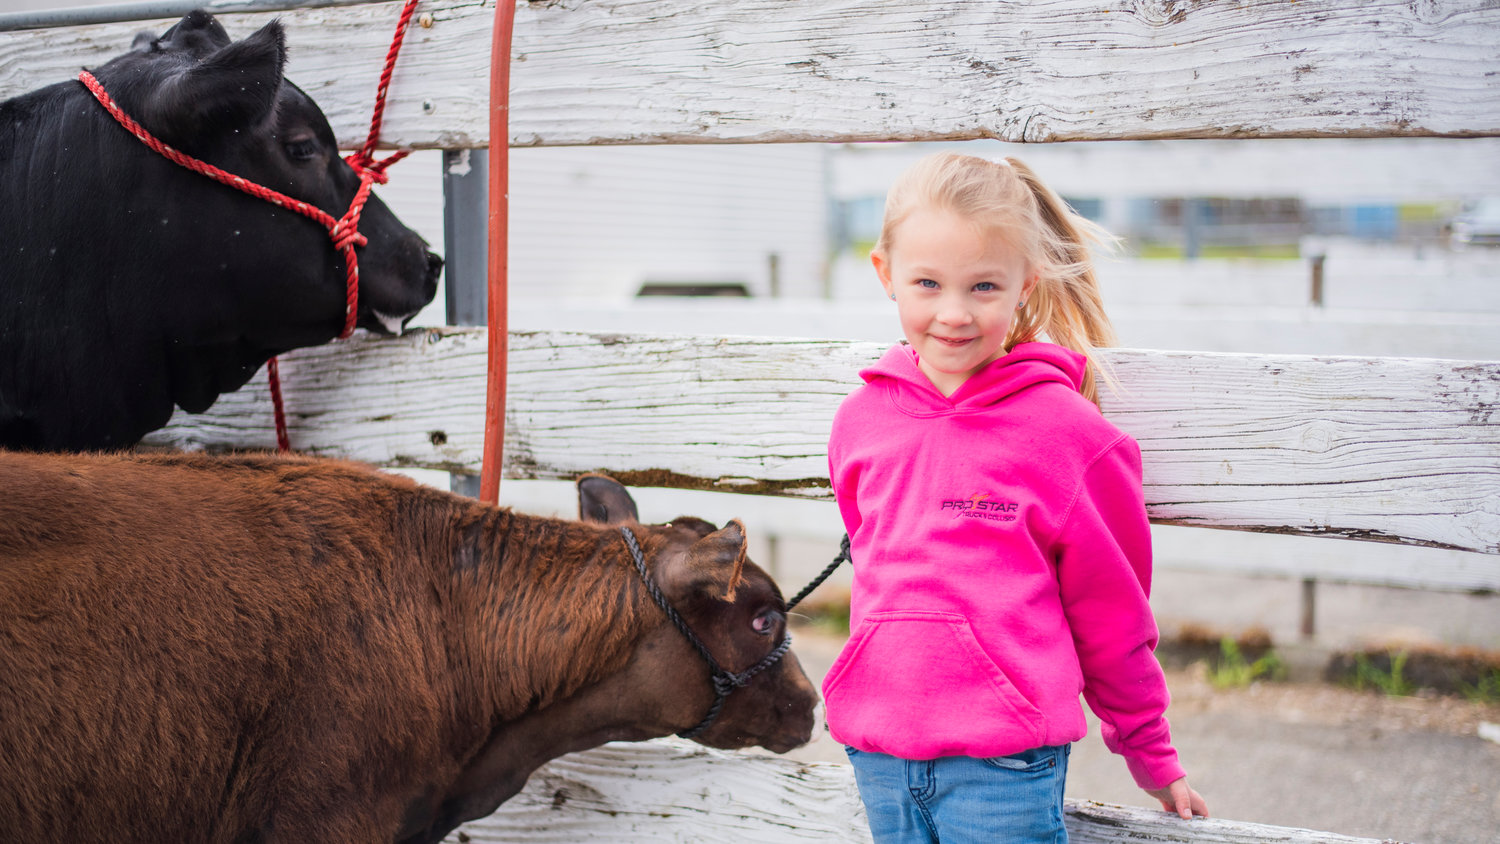 Ella Hylton, 5, poses for a photo next to her cow named Dinkey Friday morning at the Southwest Washington Fairgrounds in Centralia.